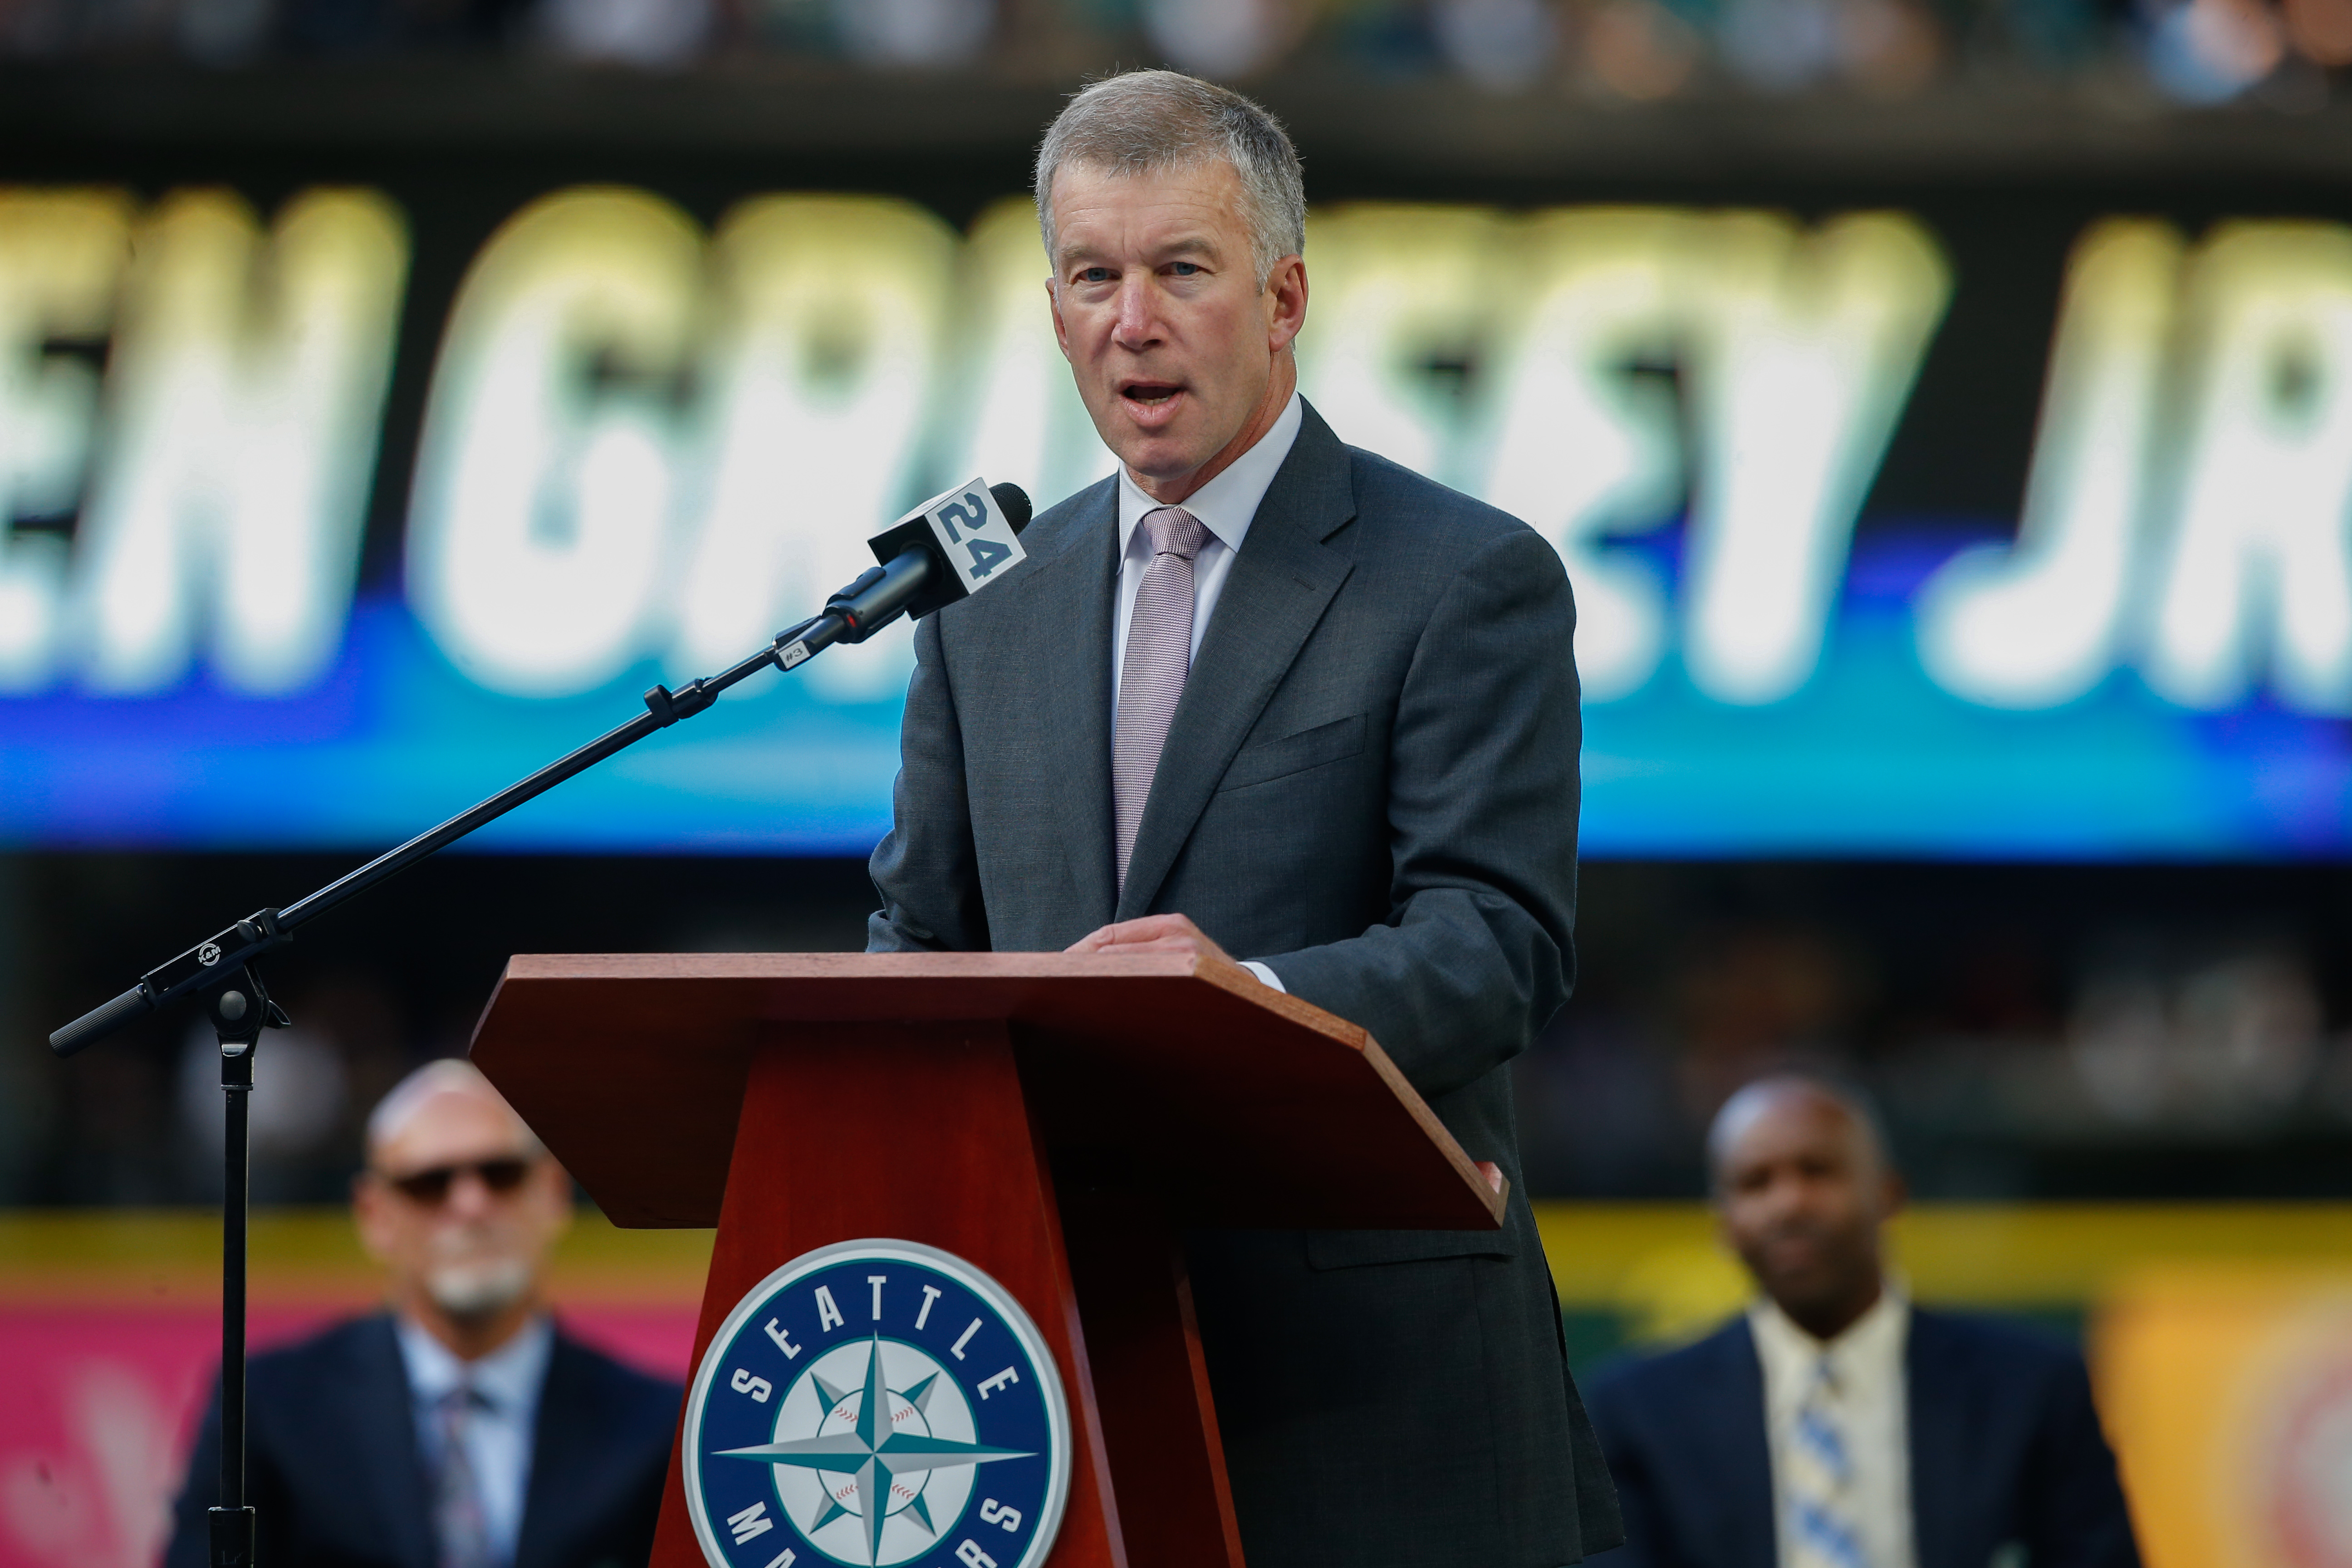 Seattle Mariners President and CEO kevin mather